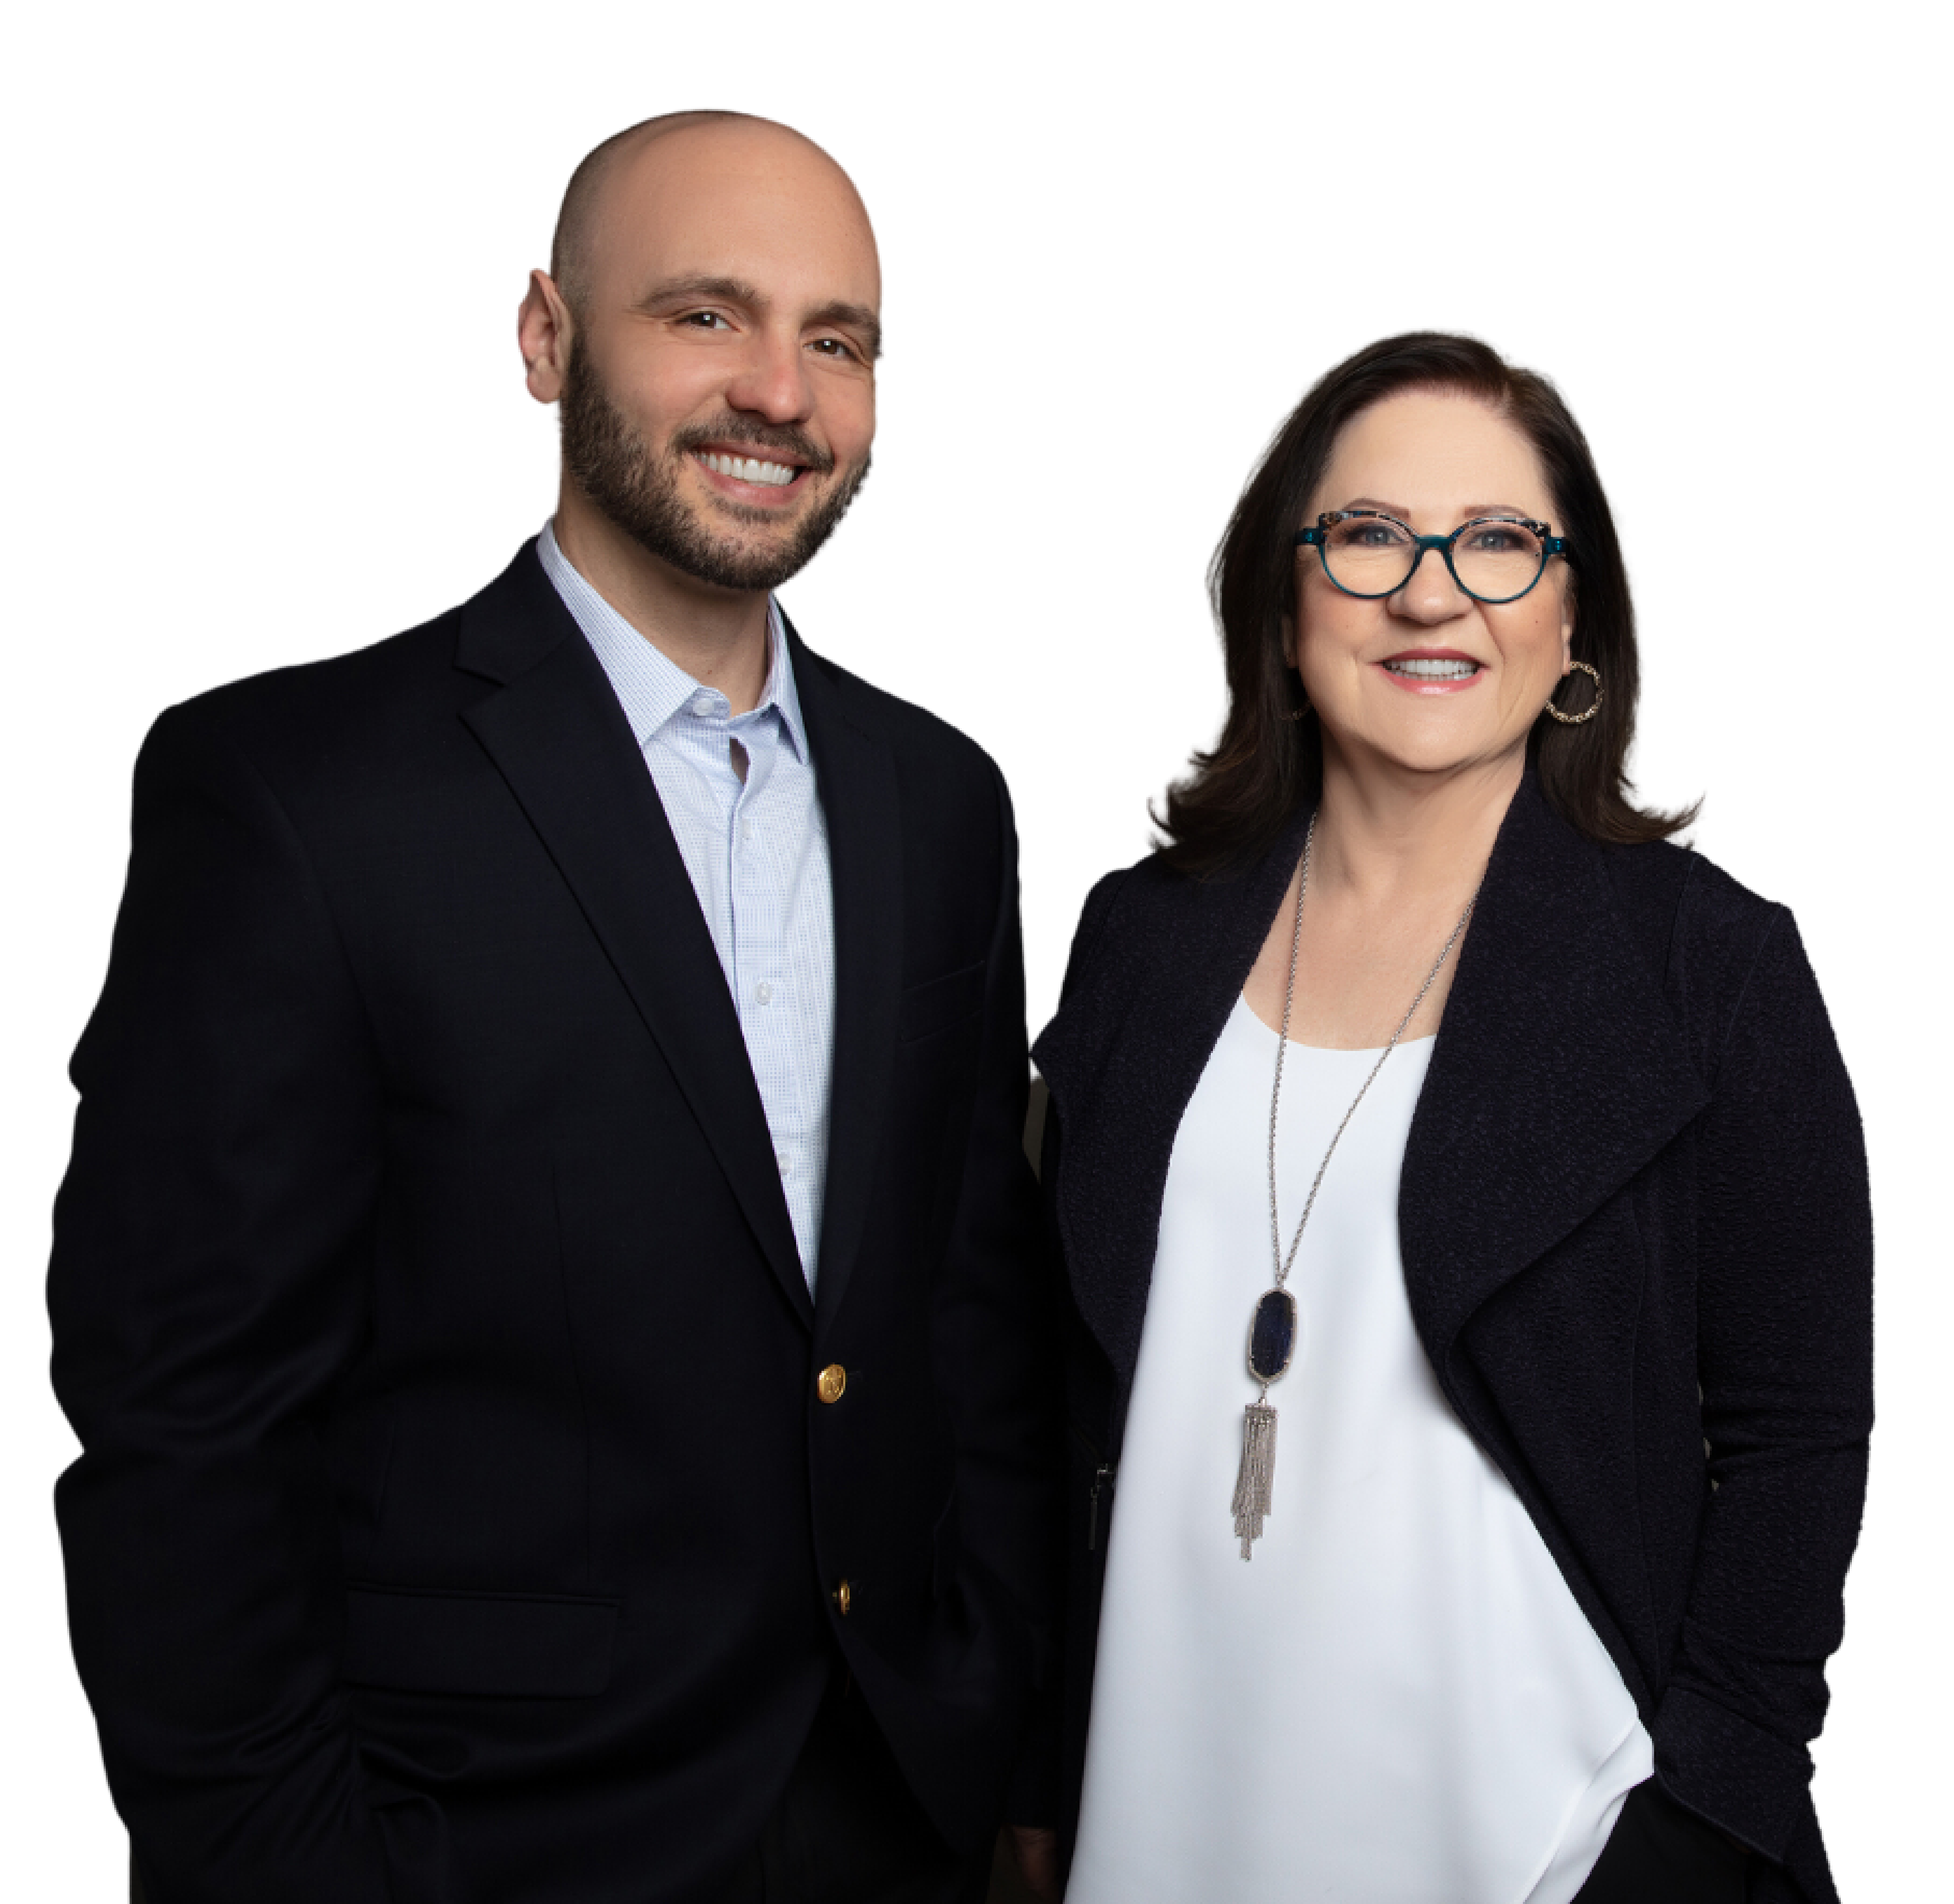 Gabe and Connie, Goldsum Insurance Solutions